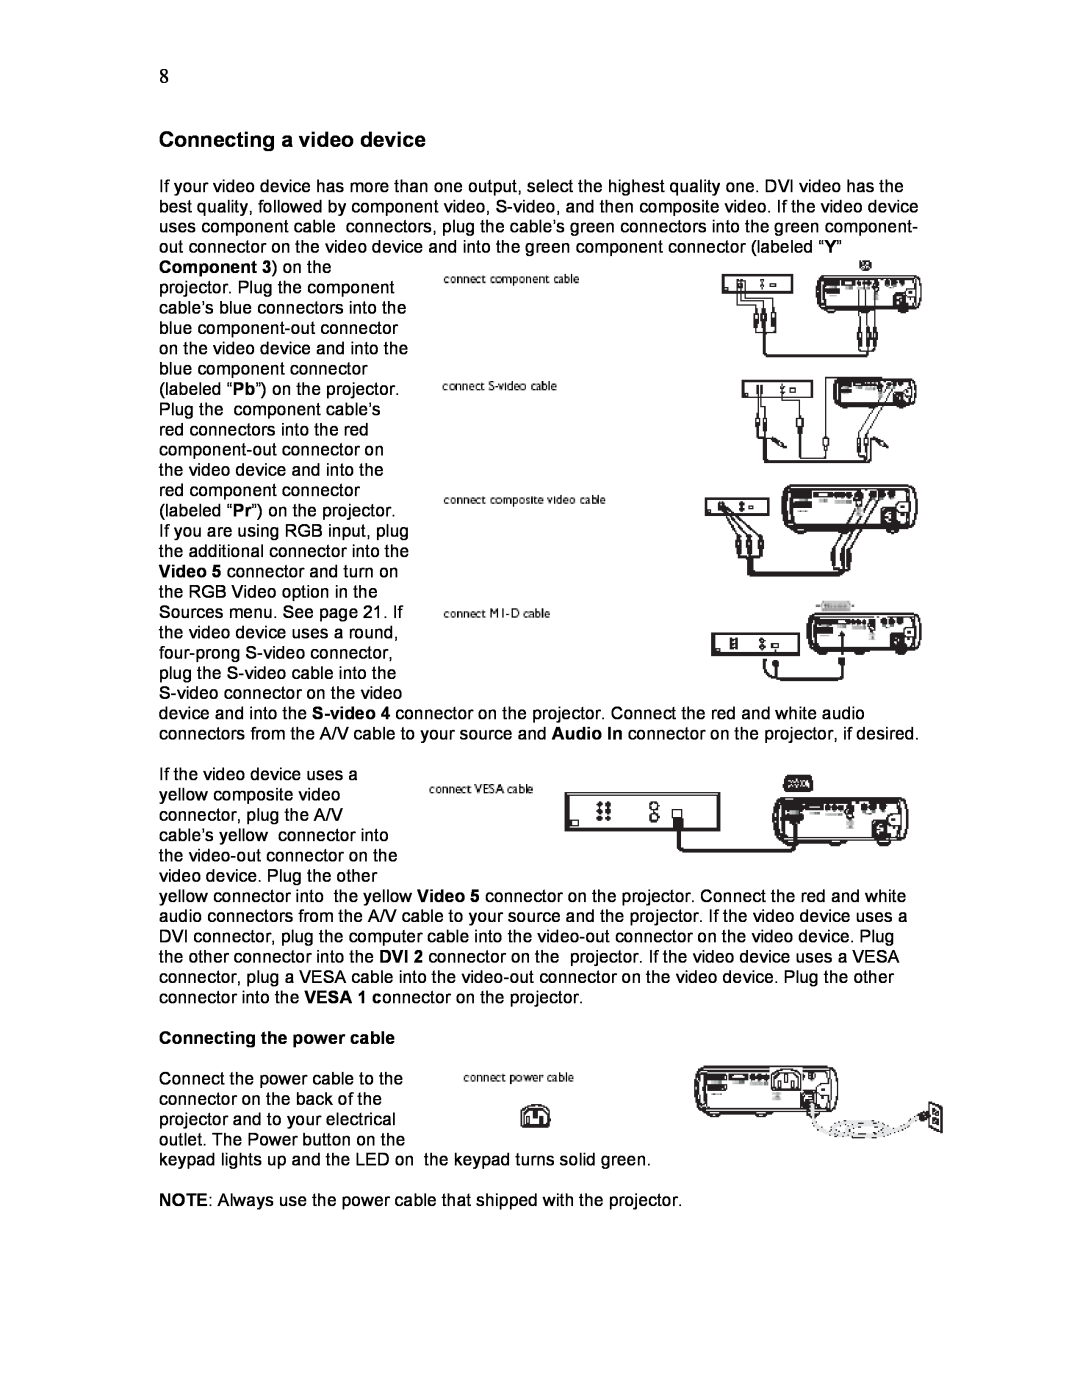 Knoll Systems HD225 user manual Connecting a video device, Connecting the power cable 